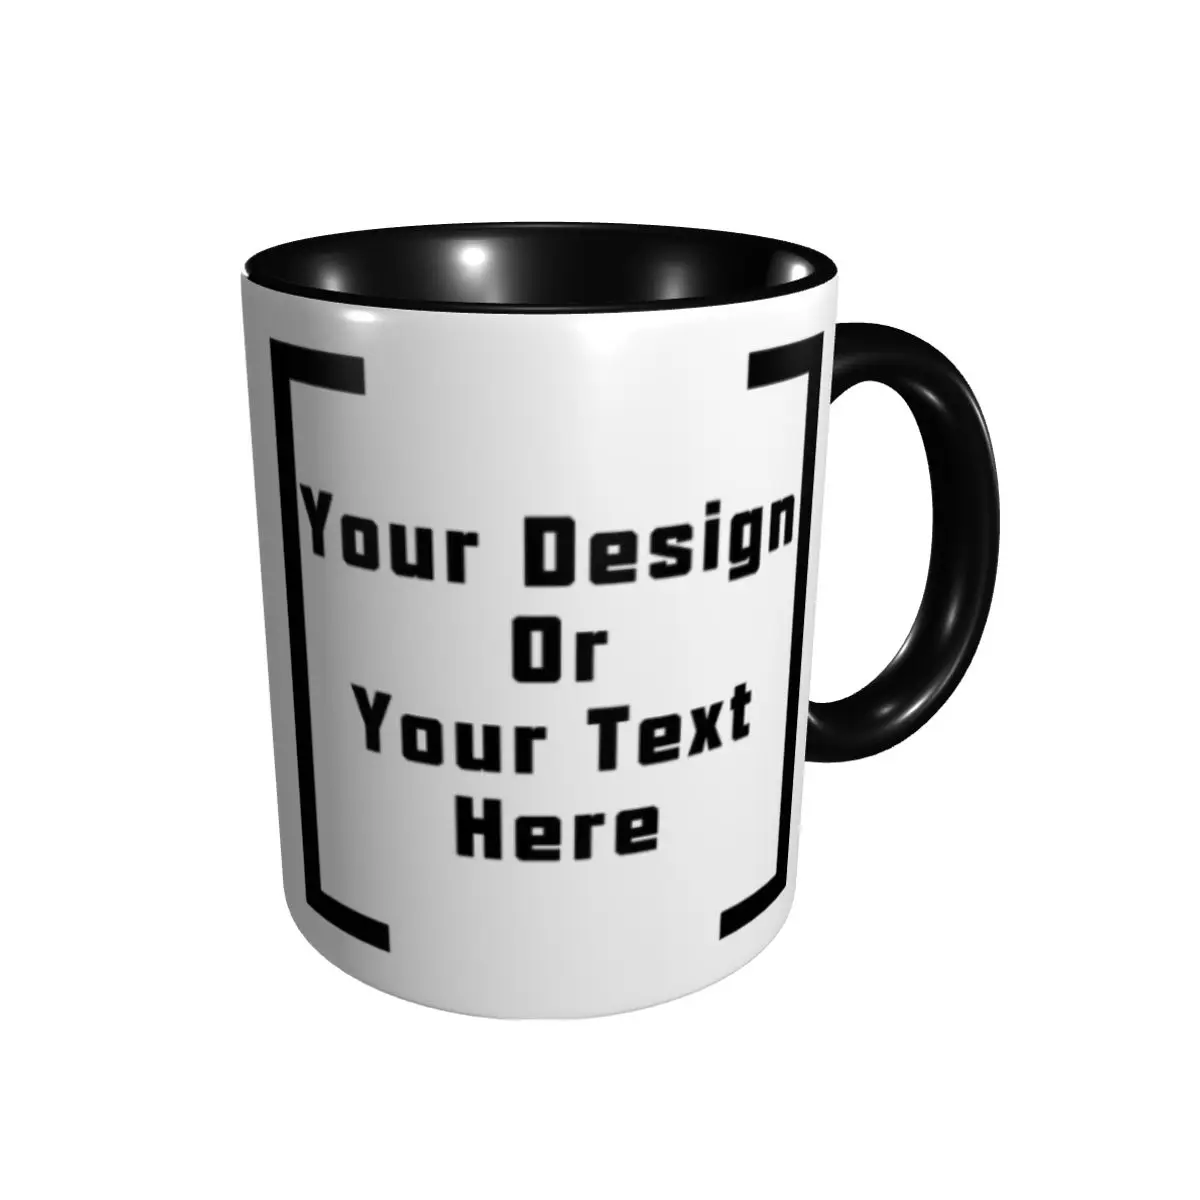 

Promo Add Your Own Design Print Your The Text Picture Here Mugs Graphic Vintage Cups Mugs Print Funny Novelty Customize tea cups